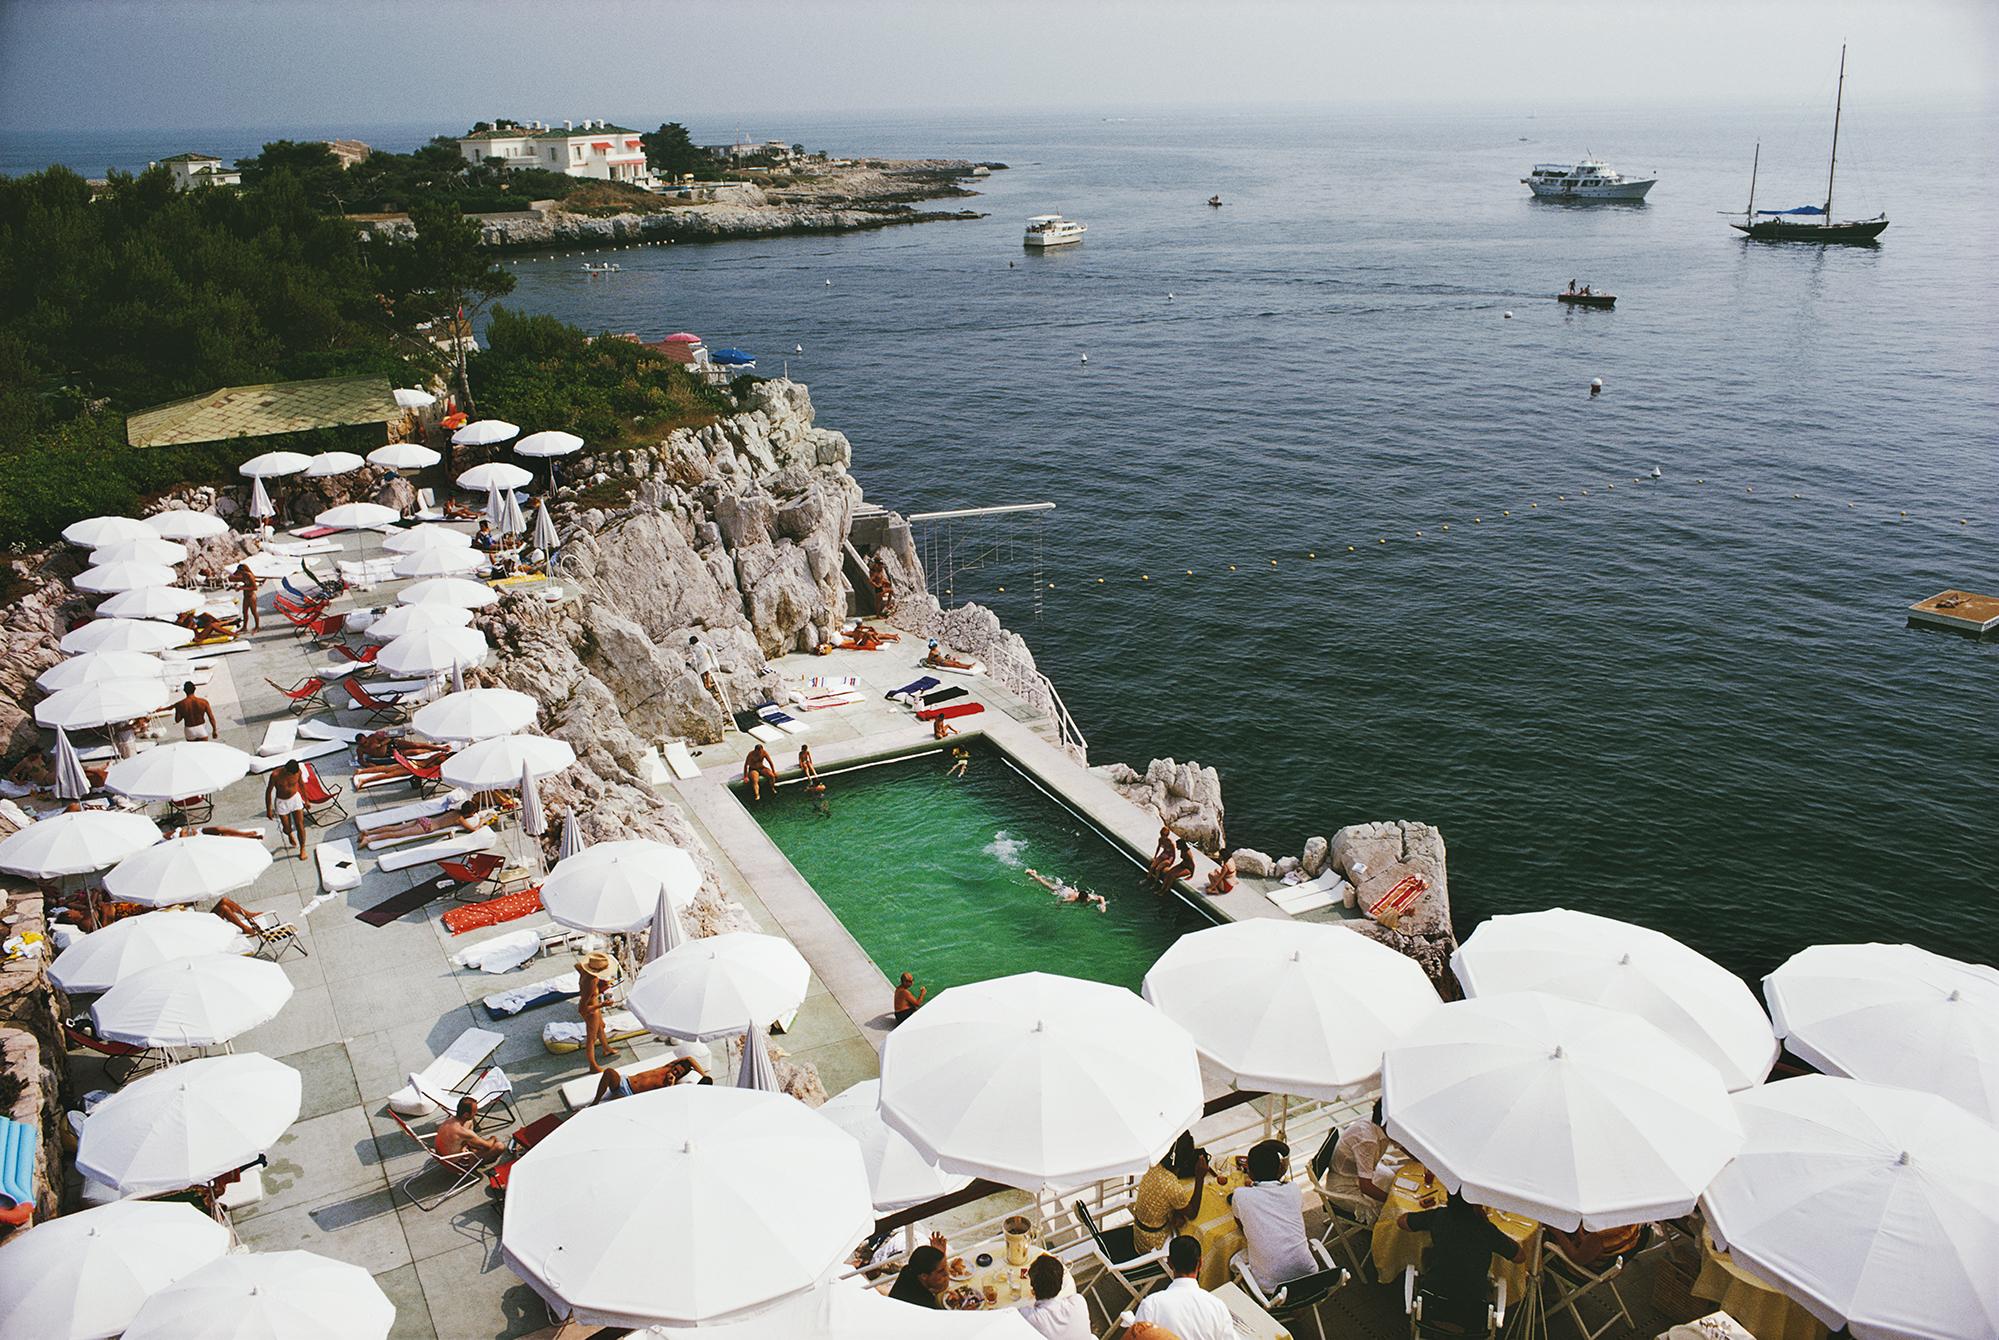 Color Photograph Slim Aarons - Pool by the Sea, Estate Edition